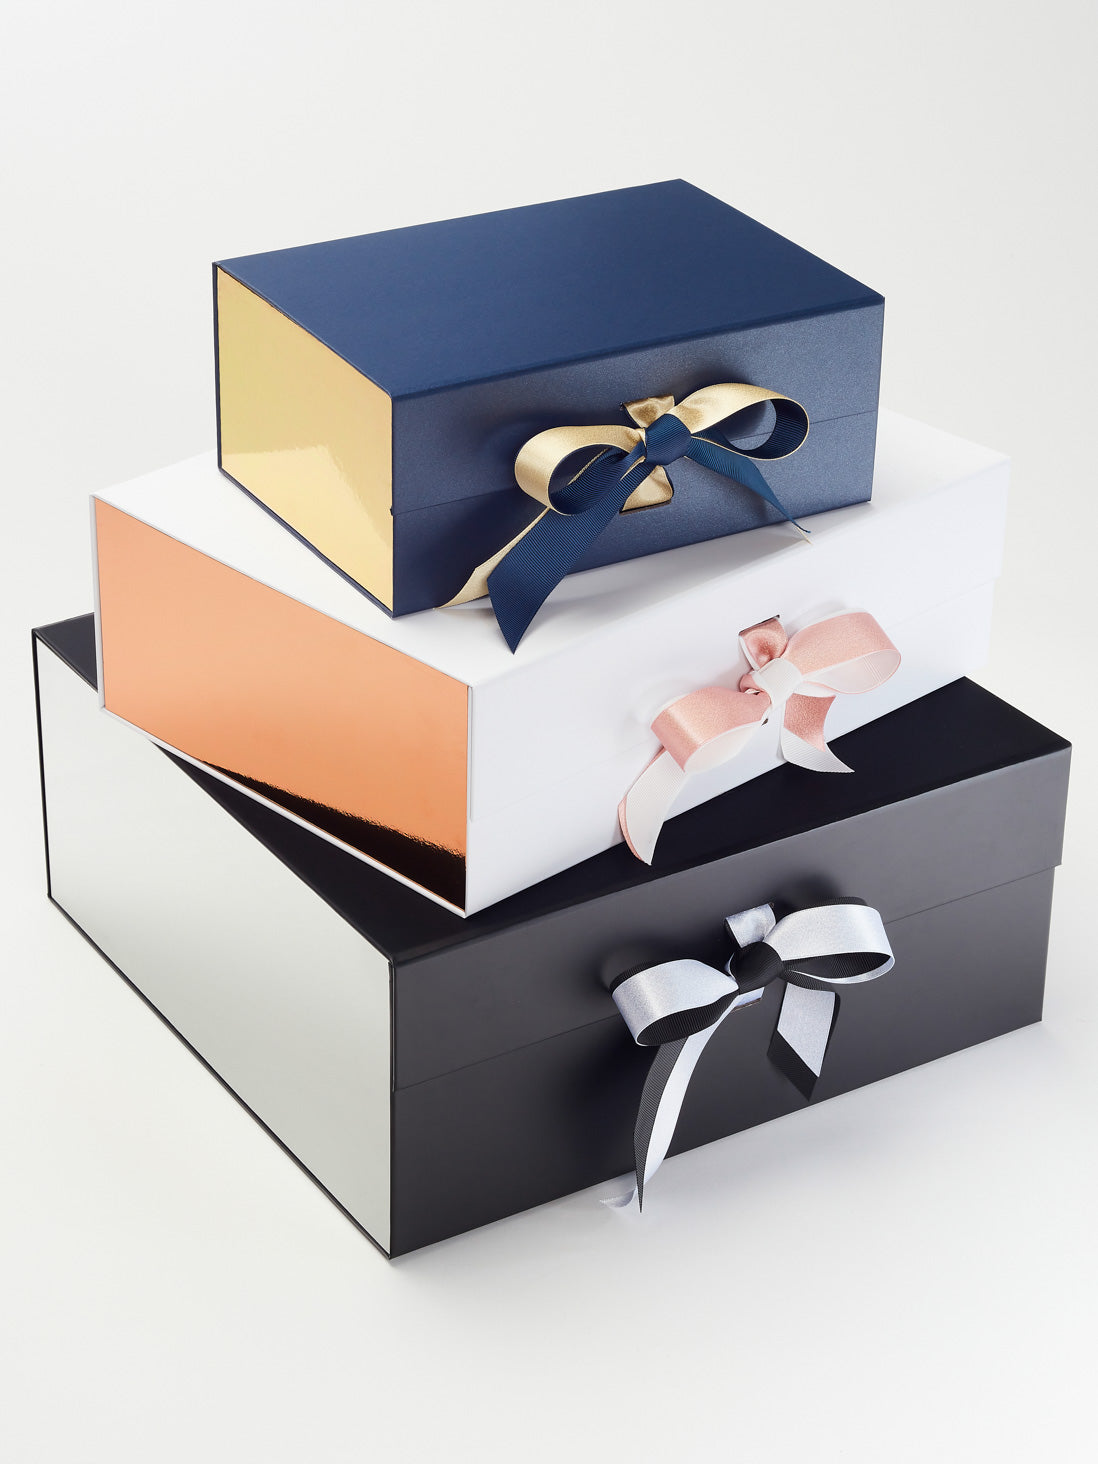 Gift Boxes: Buy Wholesale Small & Large Present Boxes Online!